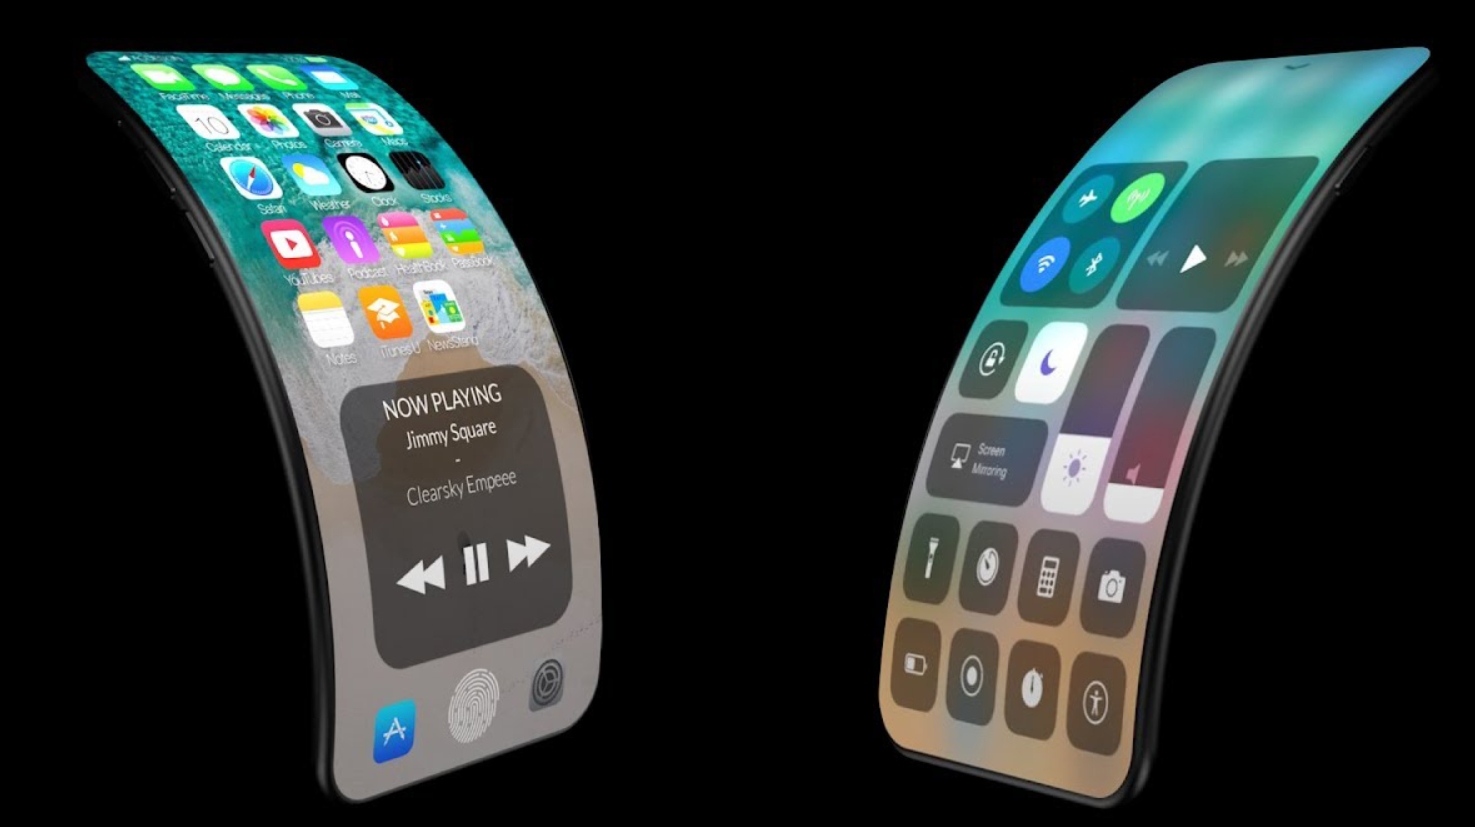 An iPhone concept